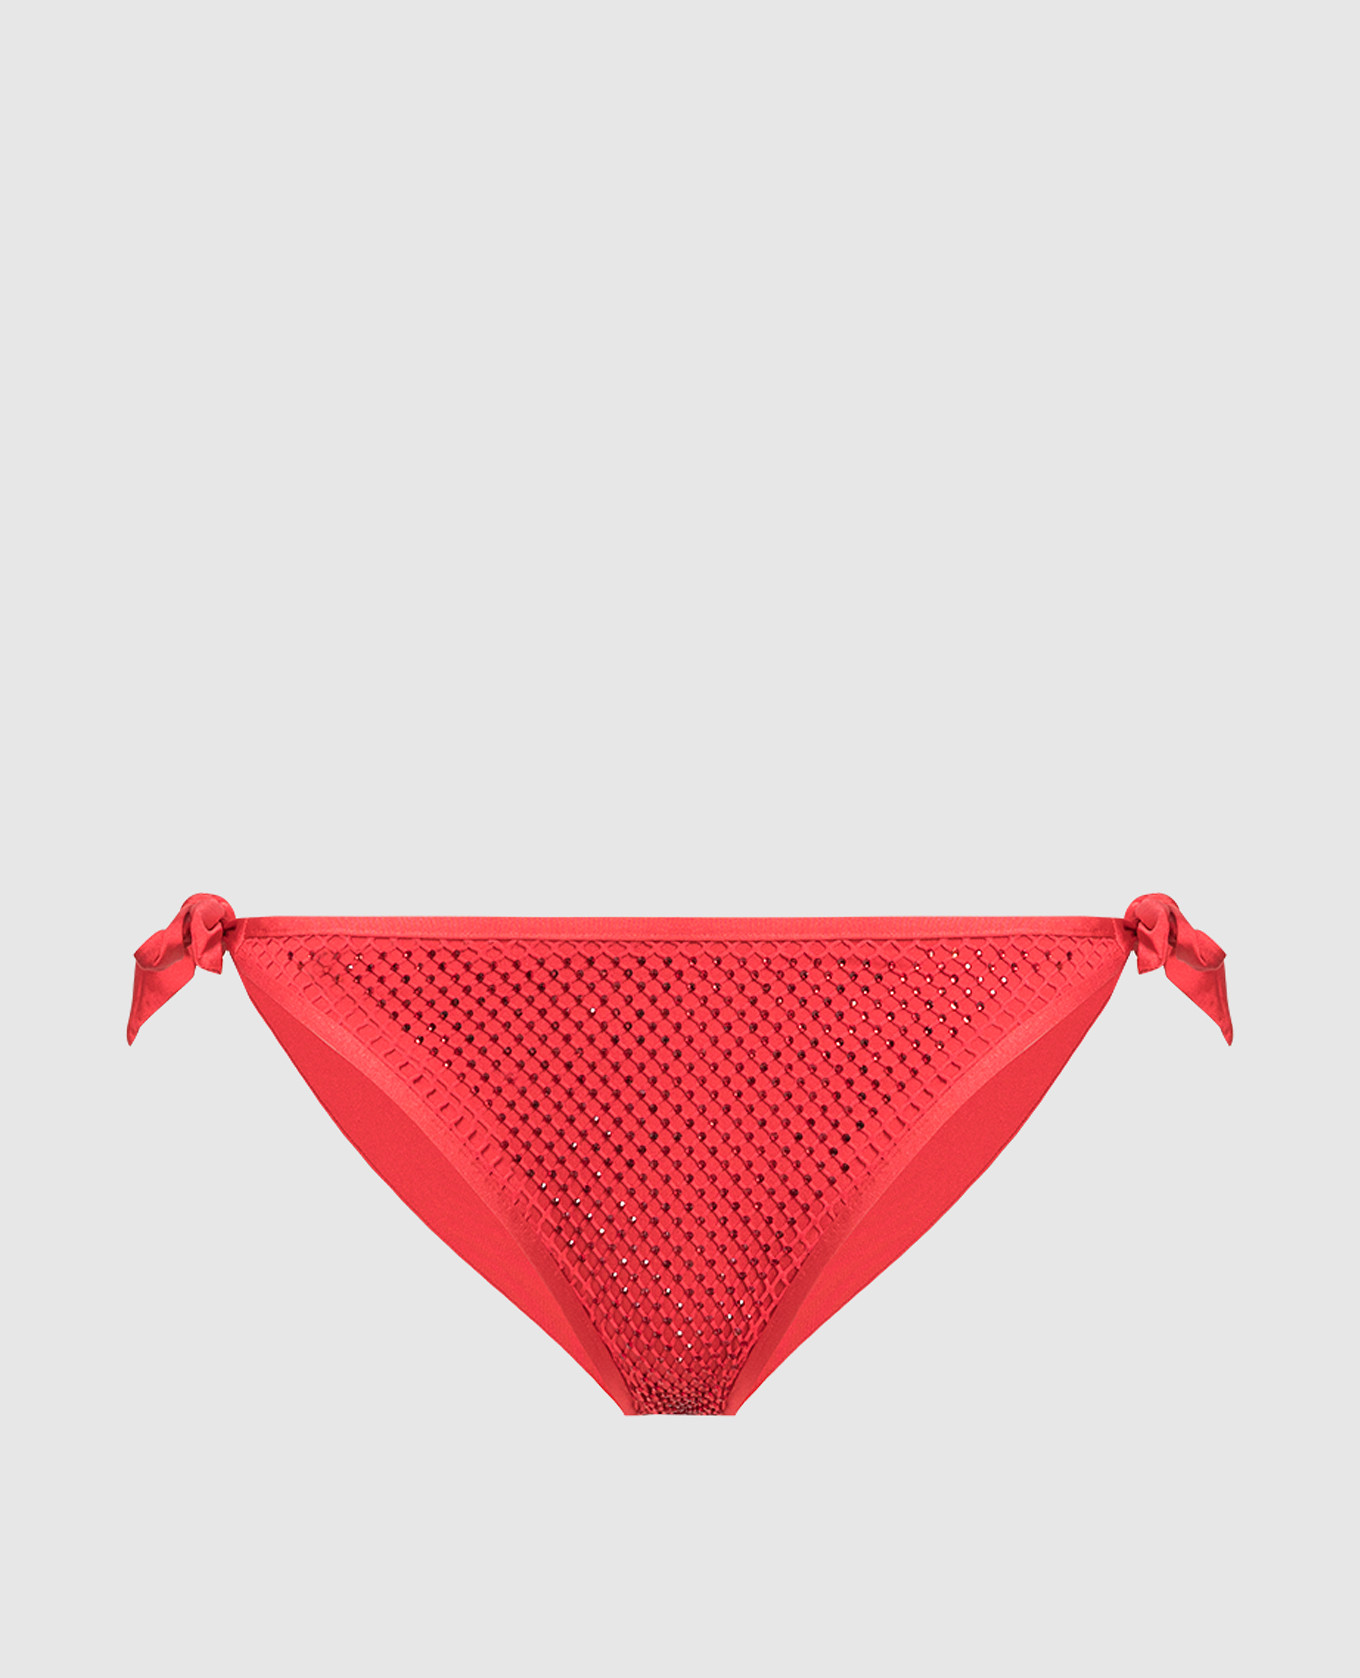 Red panties from a swimsuit with crystals